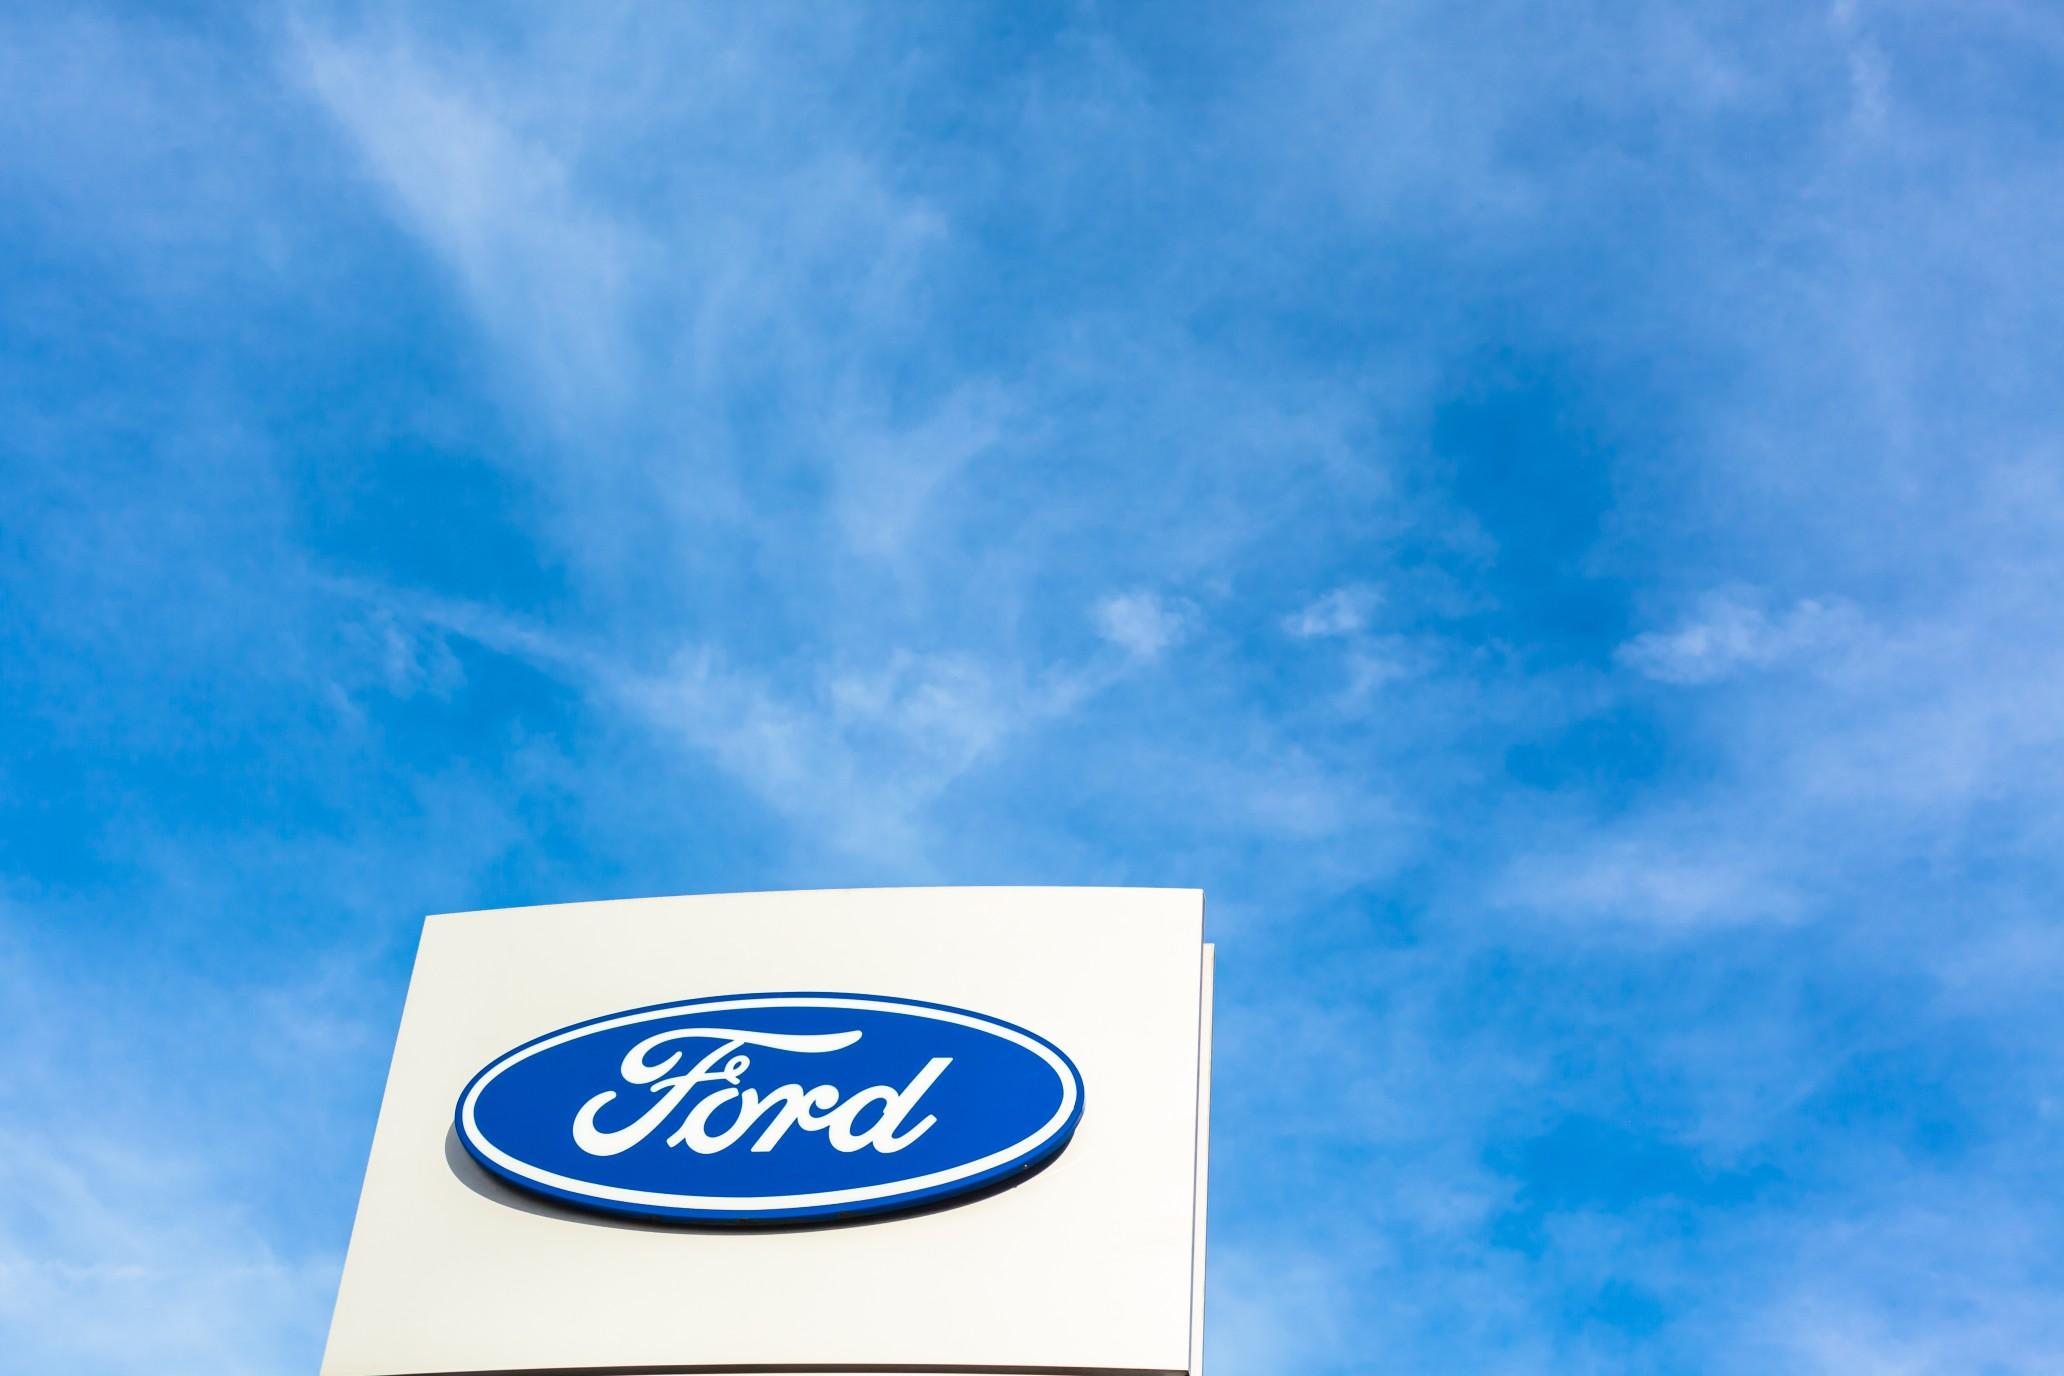 Ford is partnering with SK Innovations, a South Korea-based energy company, to make its biggest-ever investment in electric vehicles, totaling $11.4 billion.